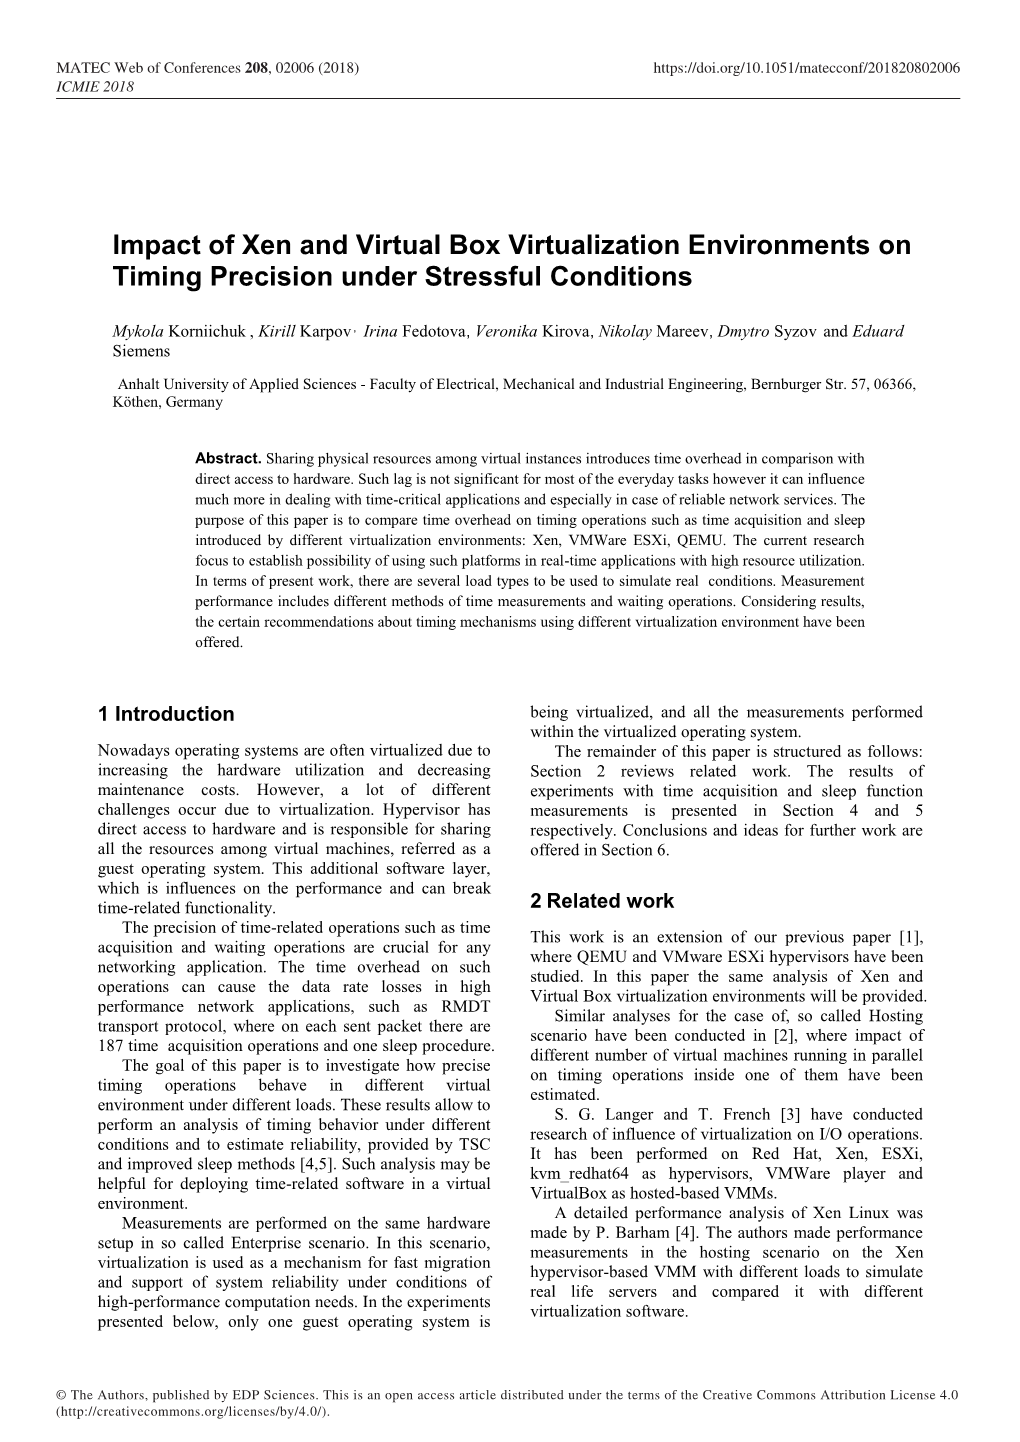 Impact of Xen and Virtual Box Virtualization Environments on Timing Precision Under Stressful Conditions